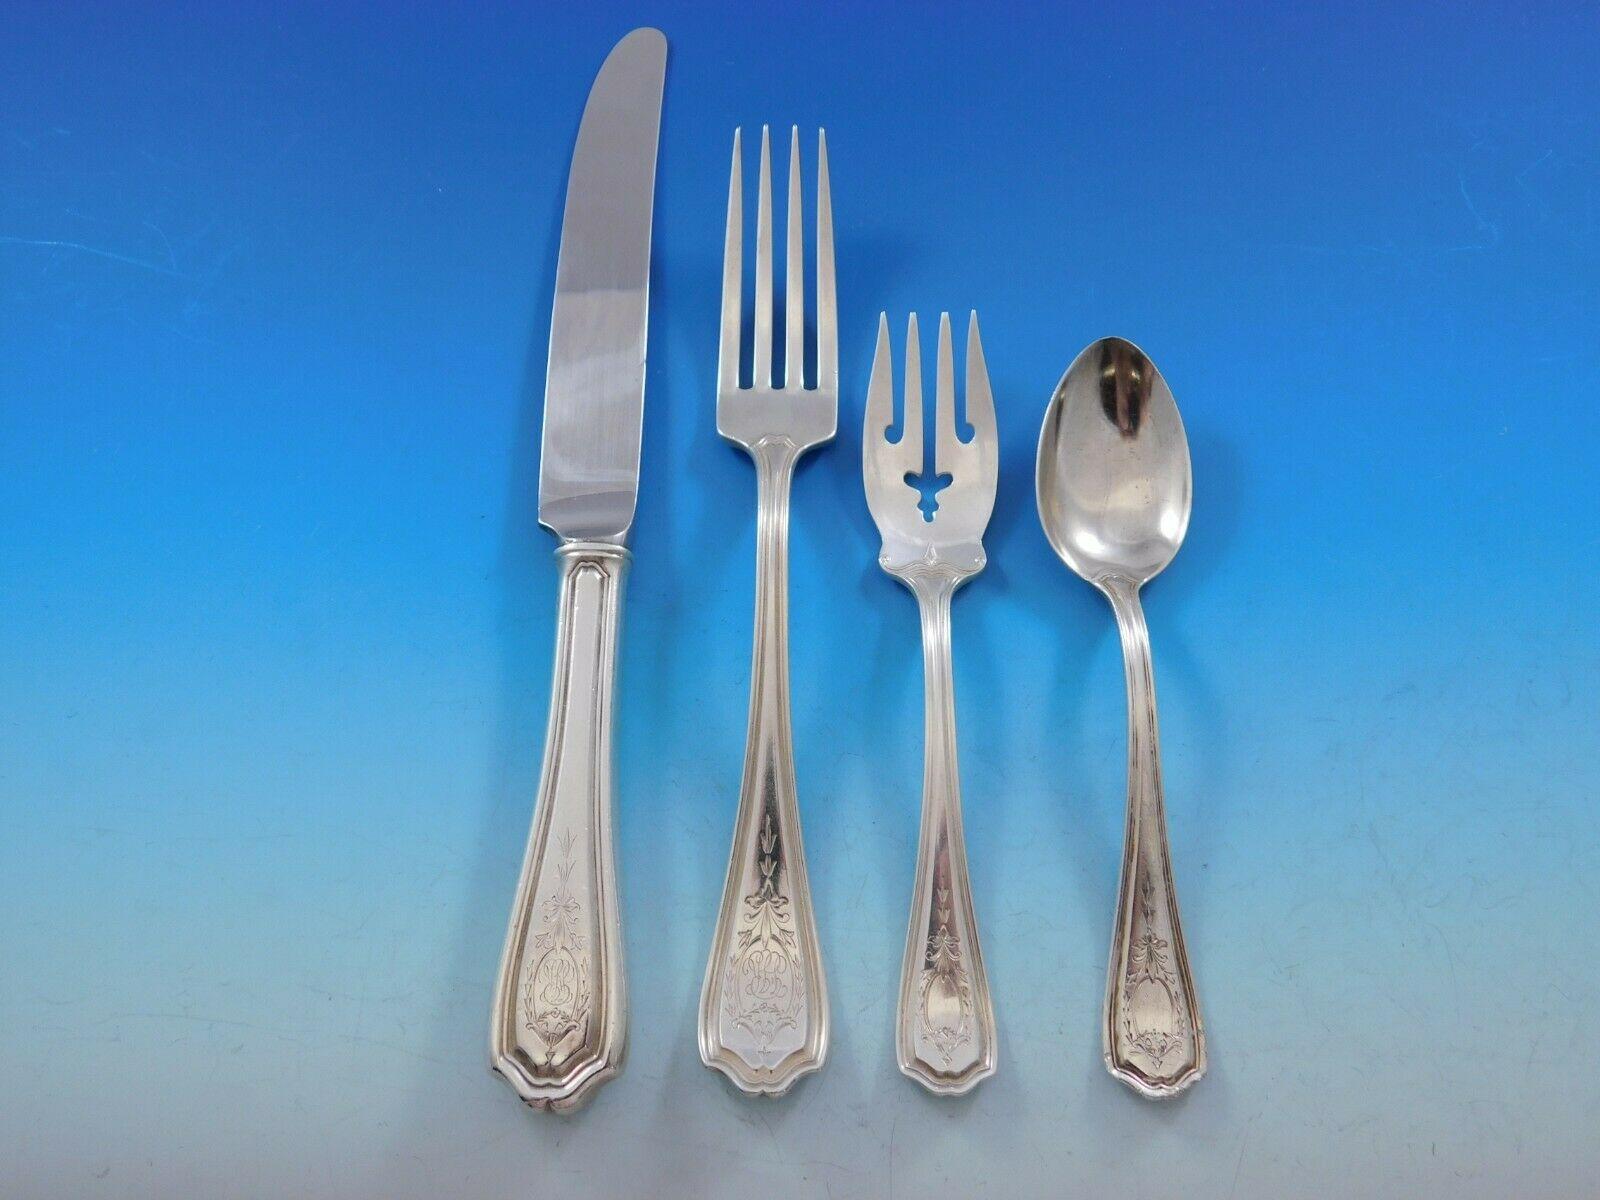 Hepplewhite Engraved by Reed & Barton sterling silver flatware set, 34 pieces. This timeless pattern is a best seller. This set includes:

6 knives, 9 1/4